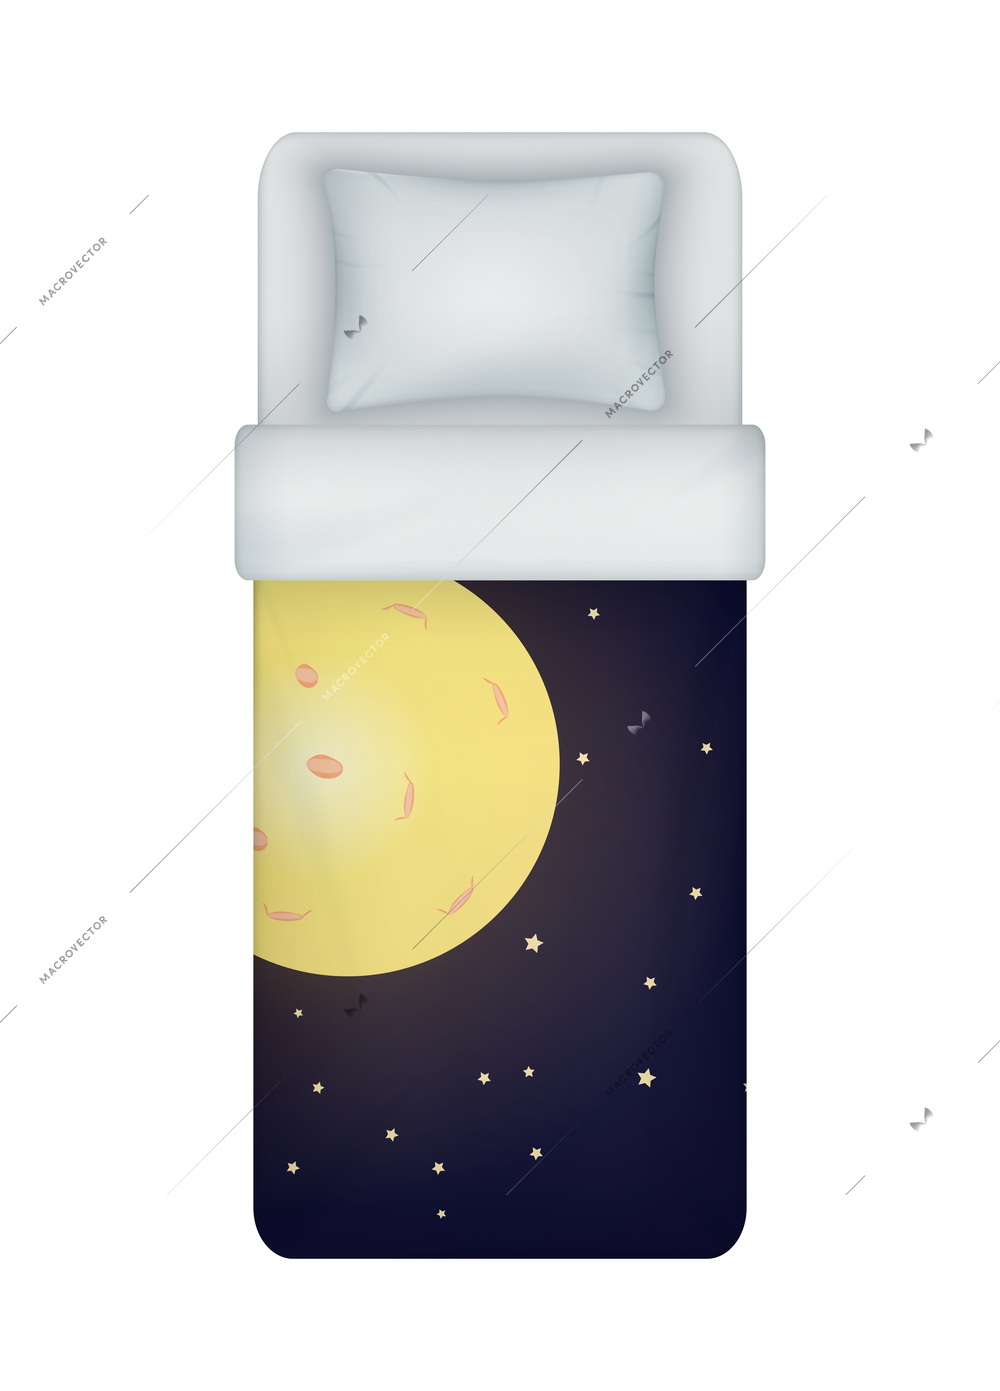 Realistic boy single bed bedding set with moon and stars on blanket cover top view vector illustration